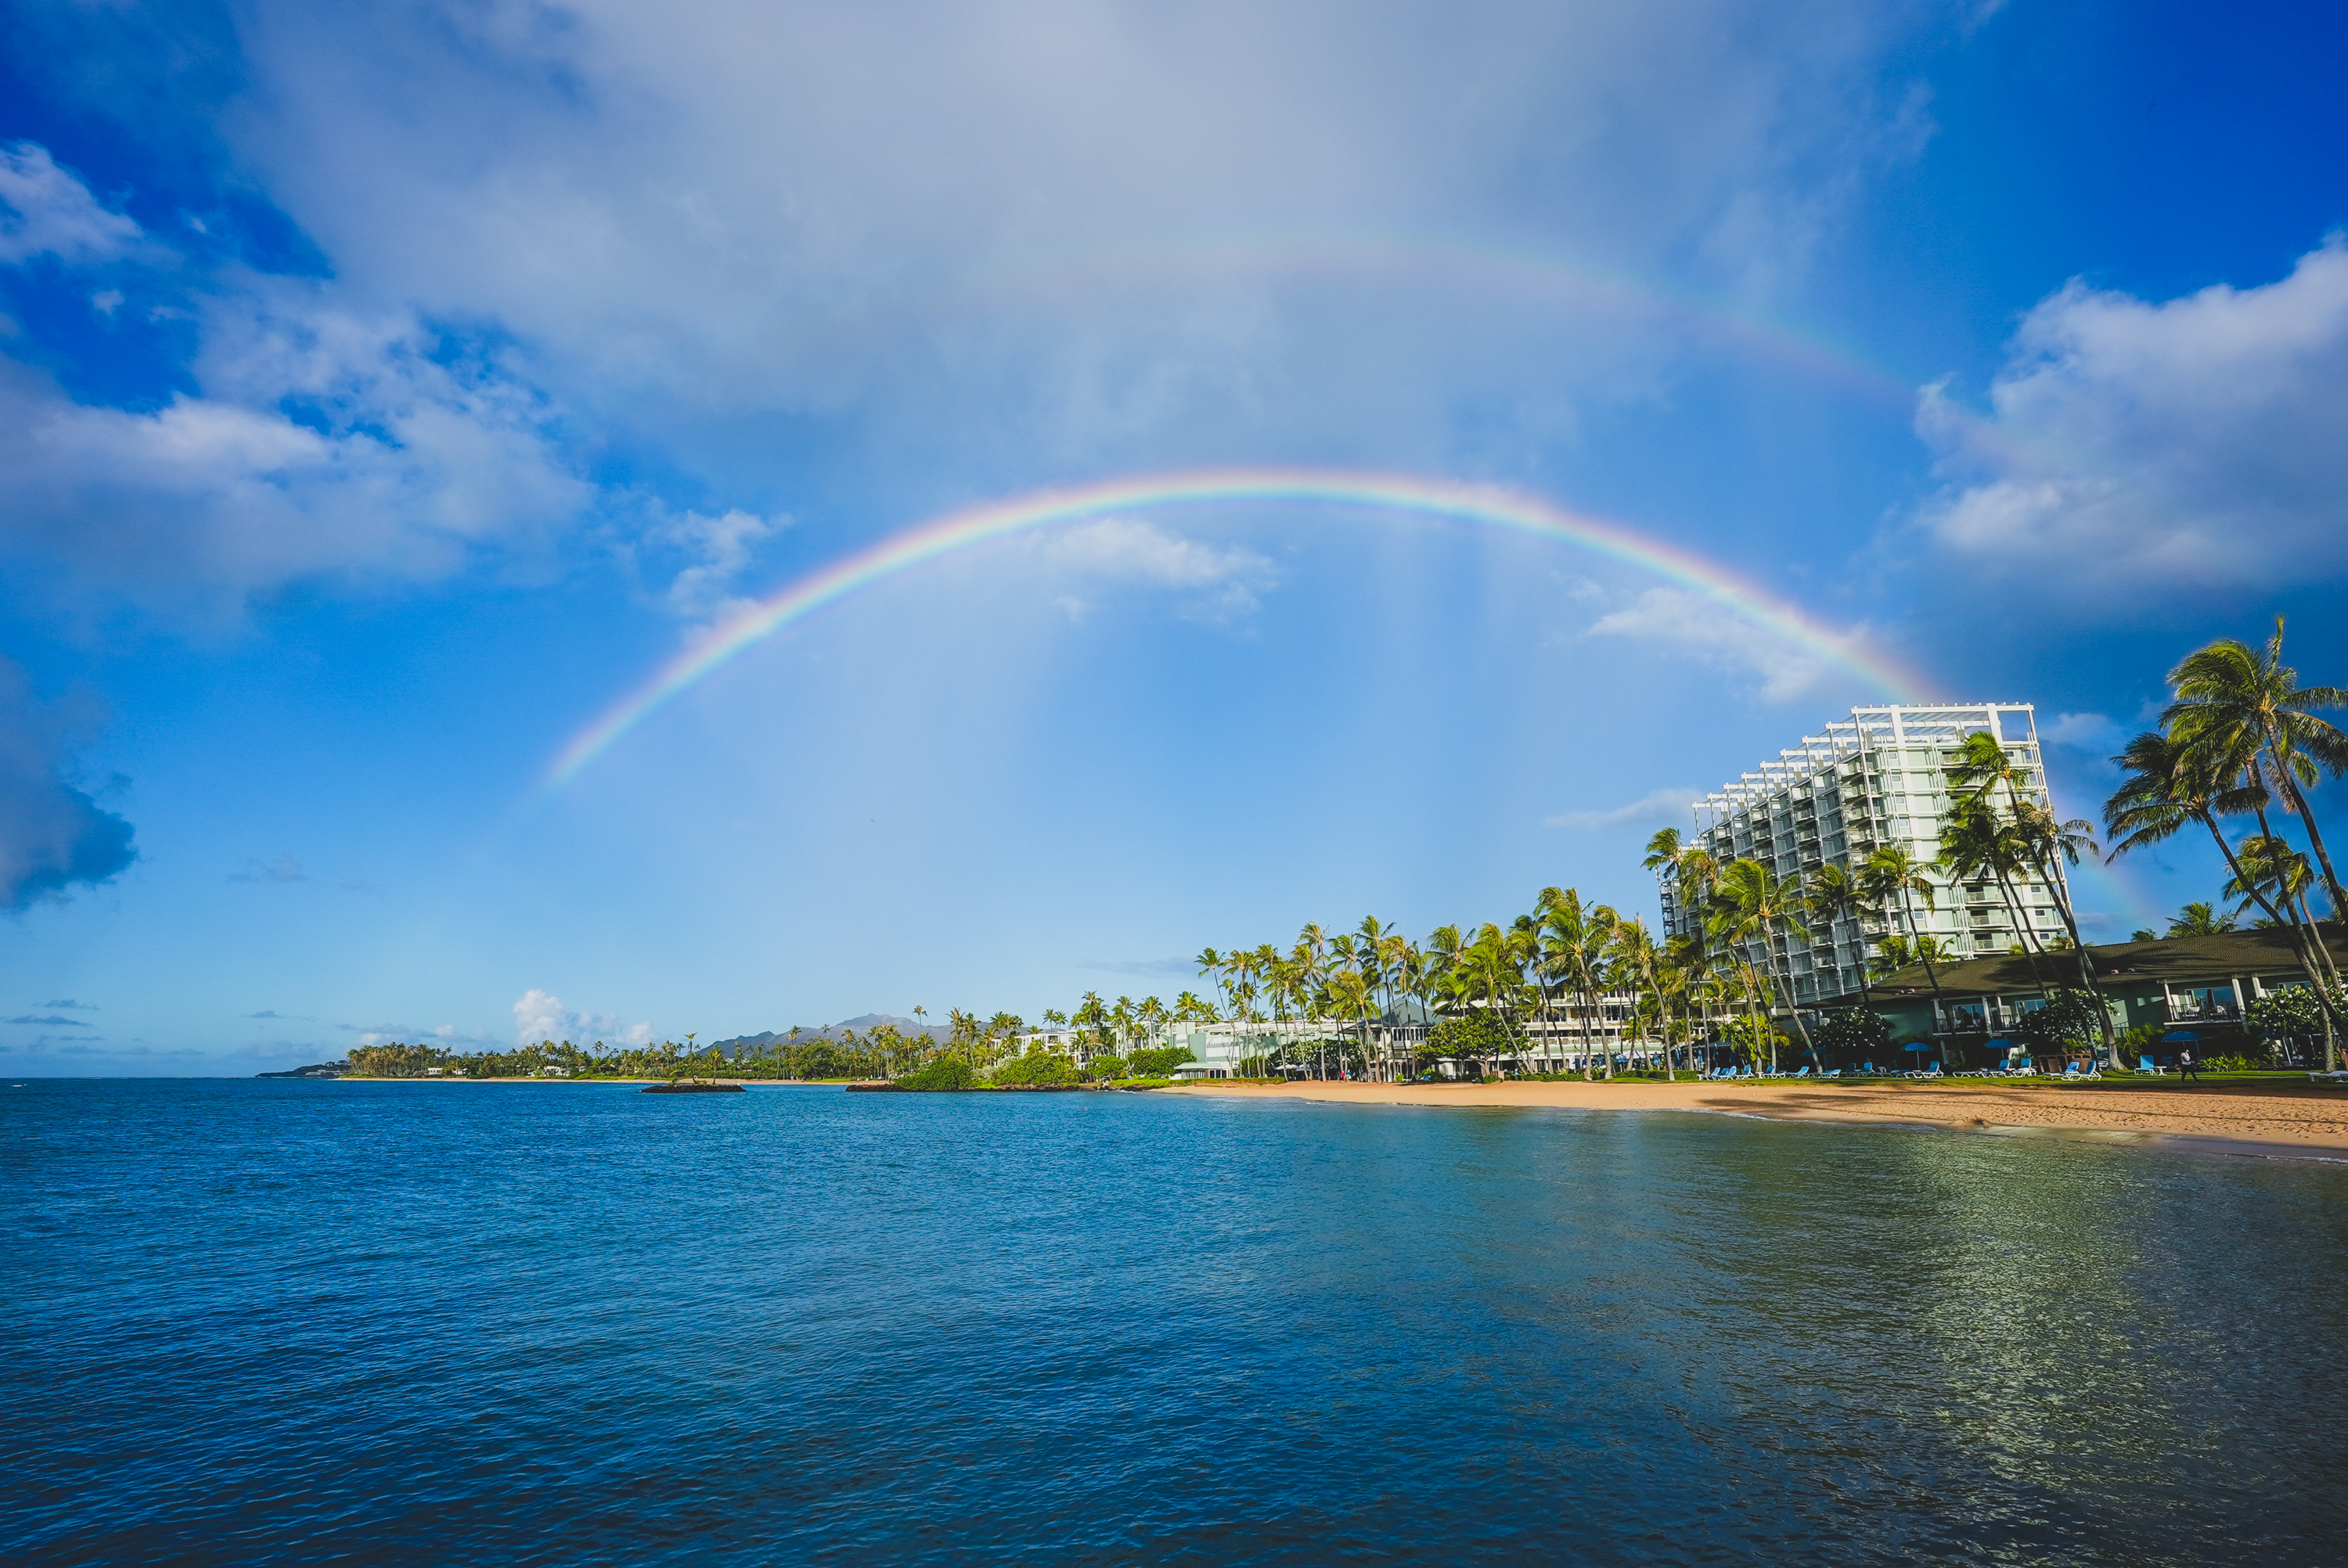 Waikiki Beach Hotels: A Local Resident's Perspective.